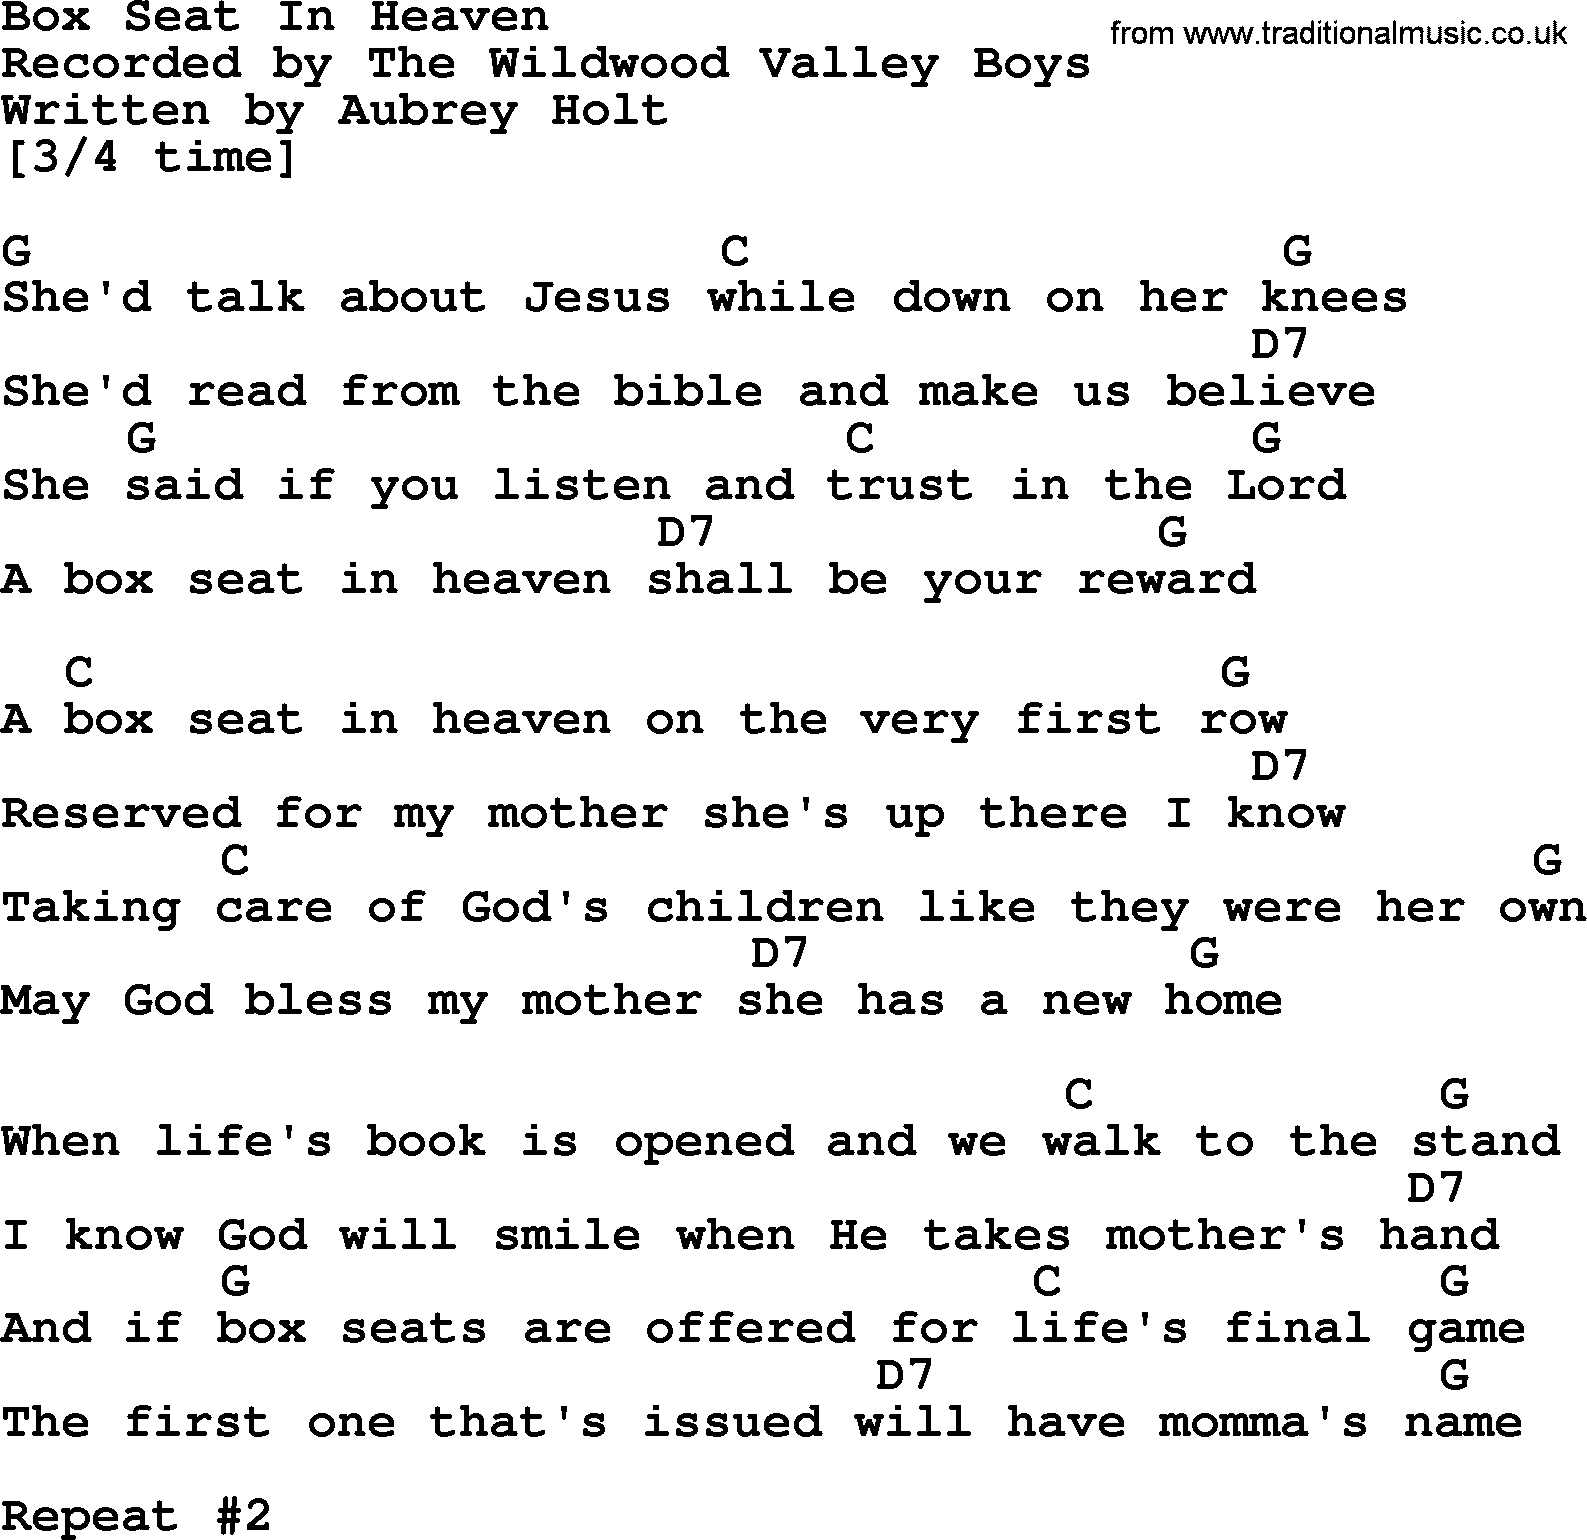 Bluegrass song: Box Seat In Heaven, lyrics and chords